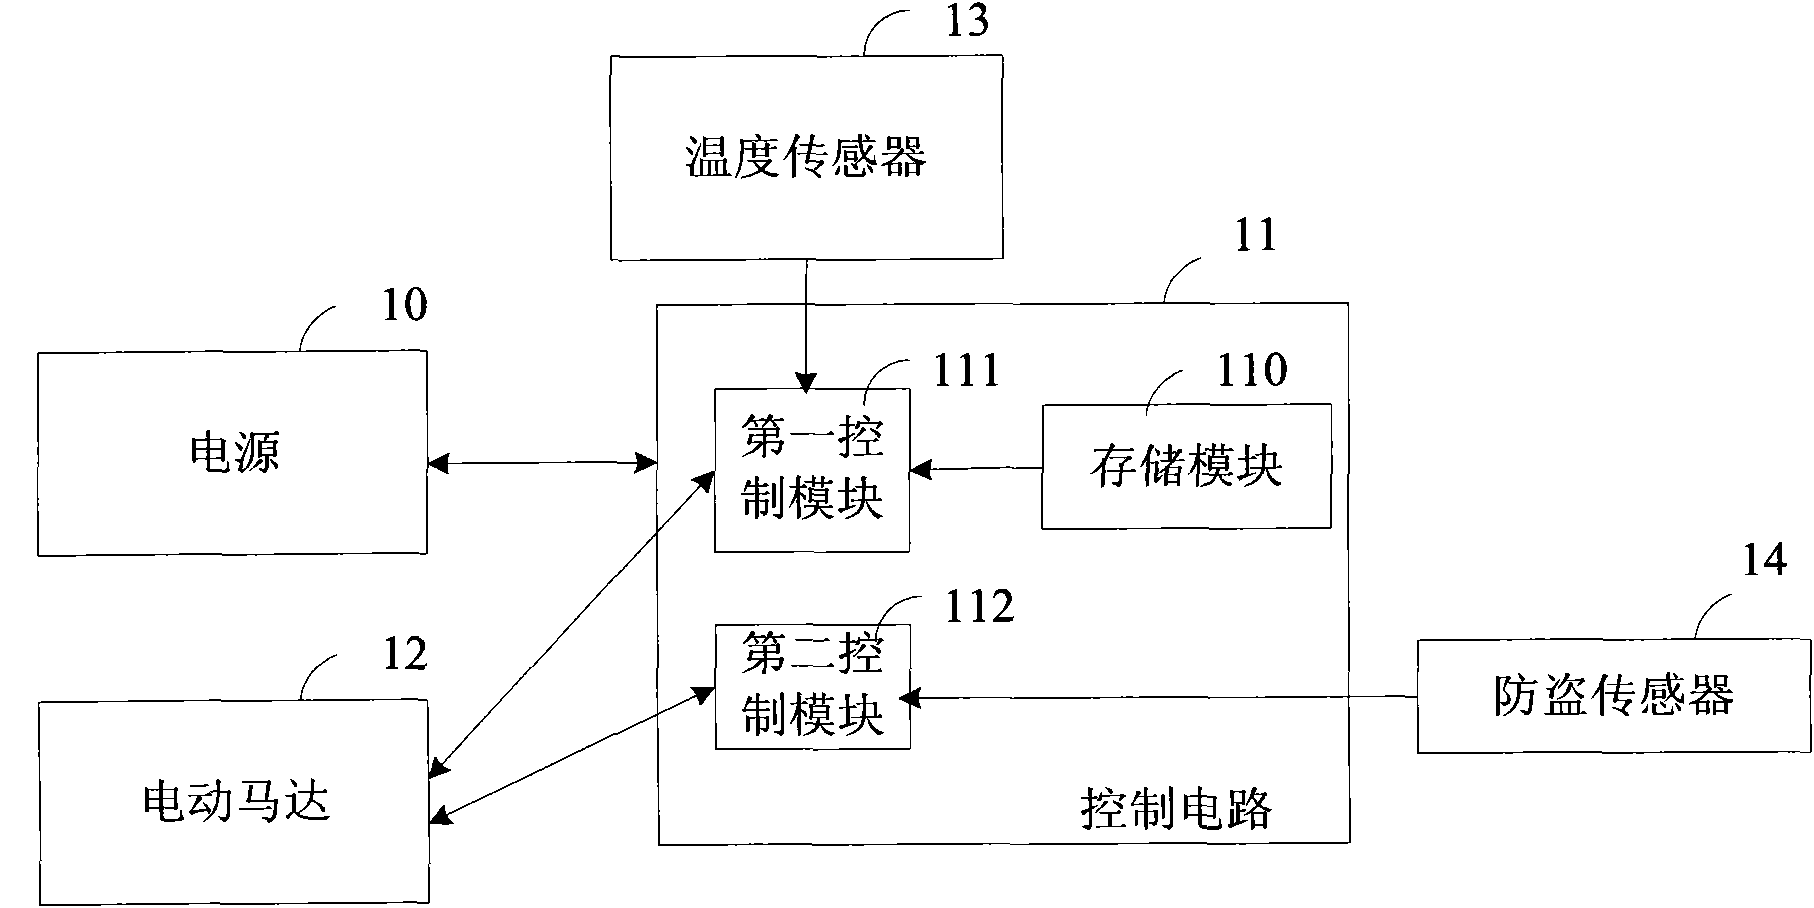 Device and method for controlling automatic ascending and descending of vehicular windows